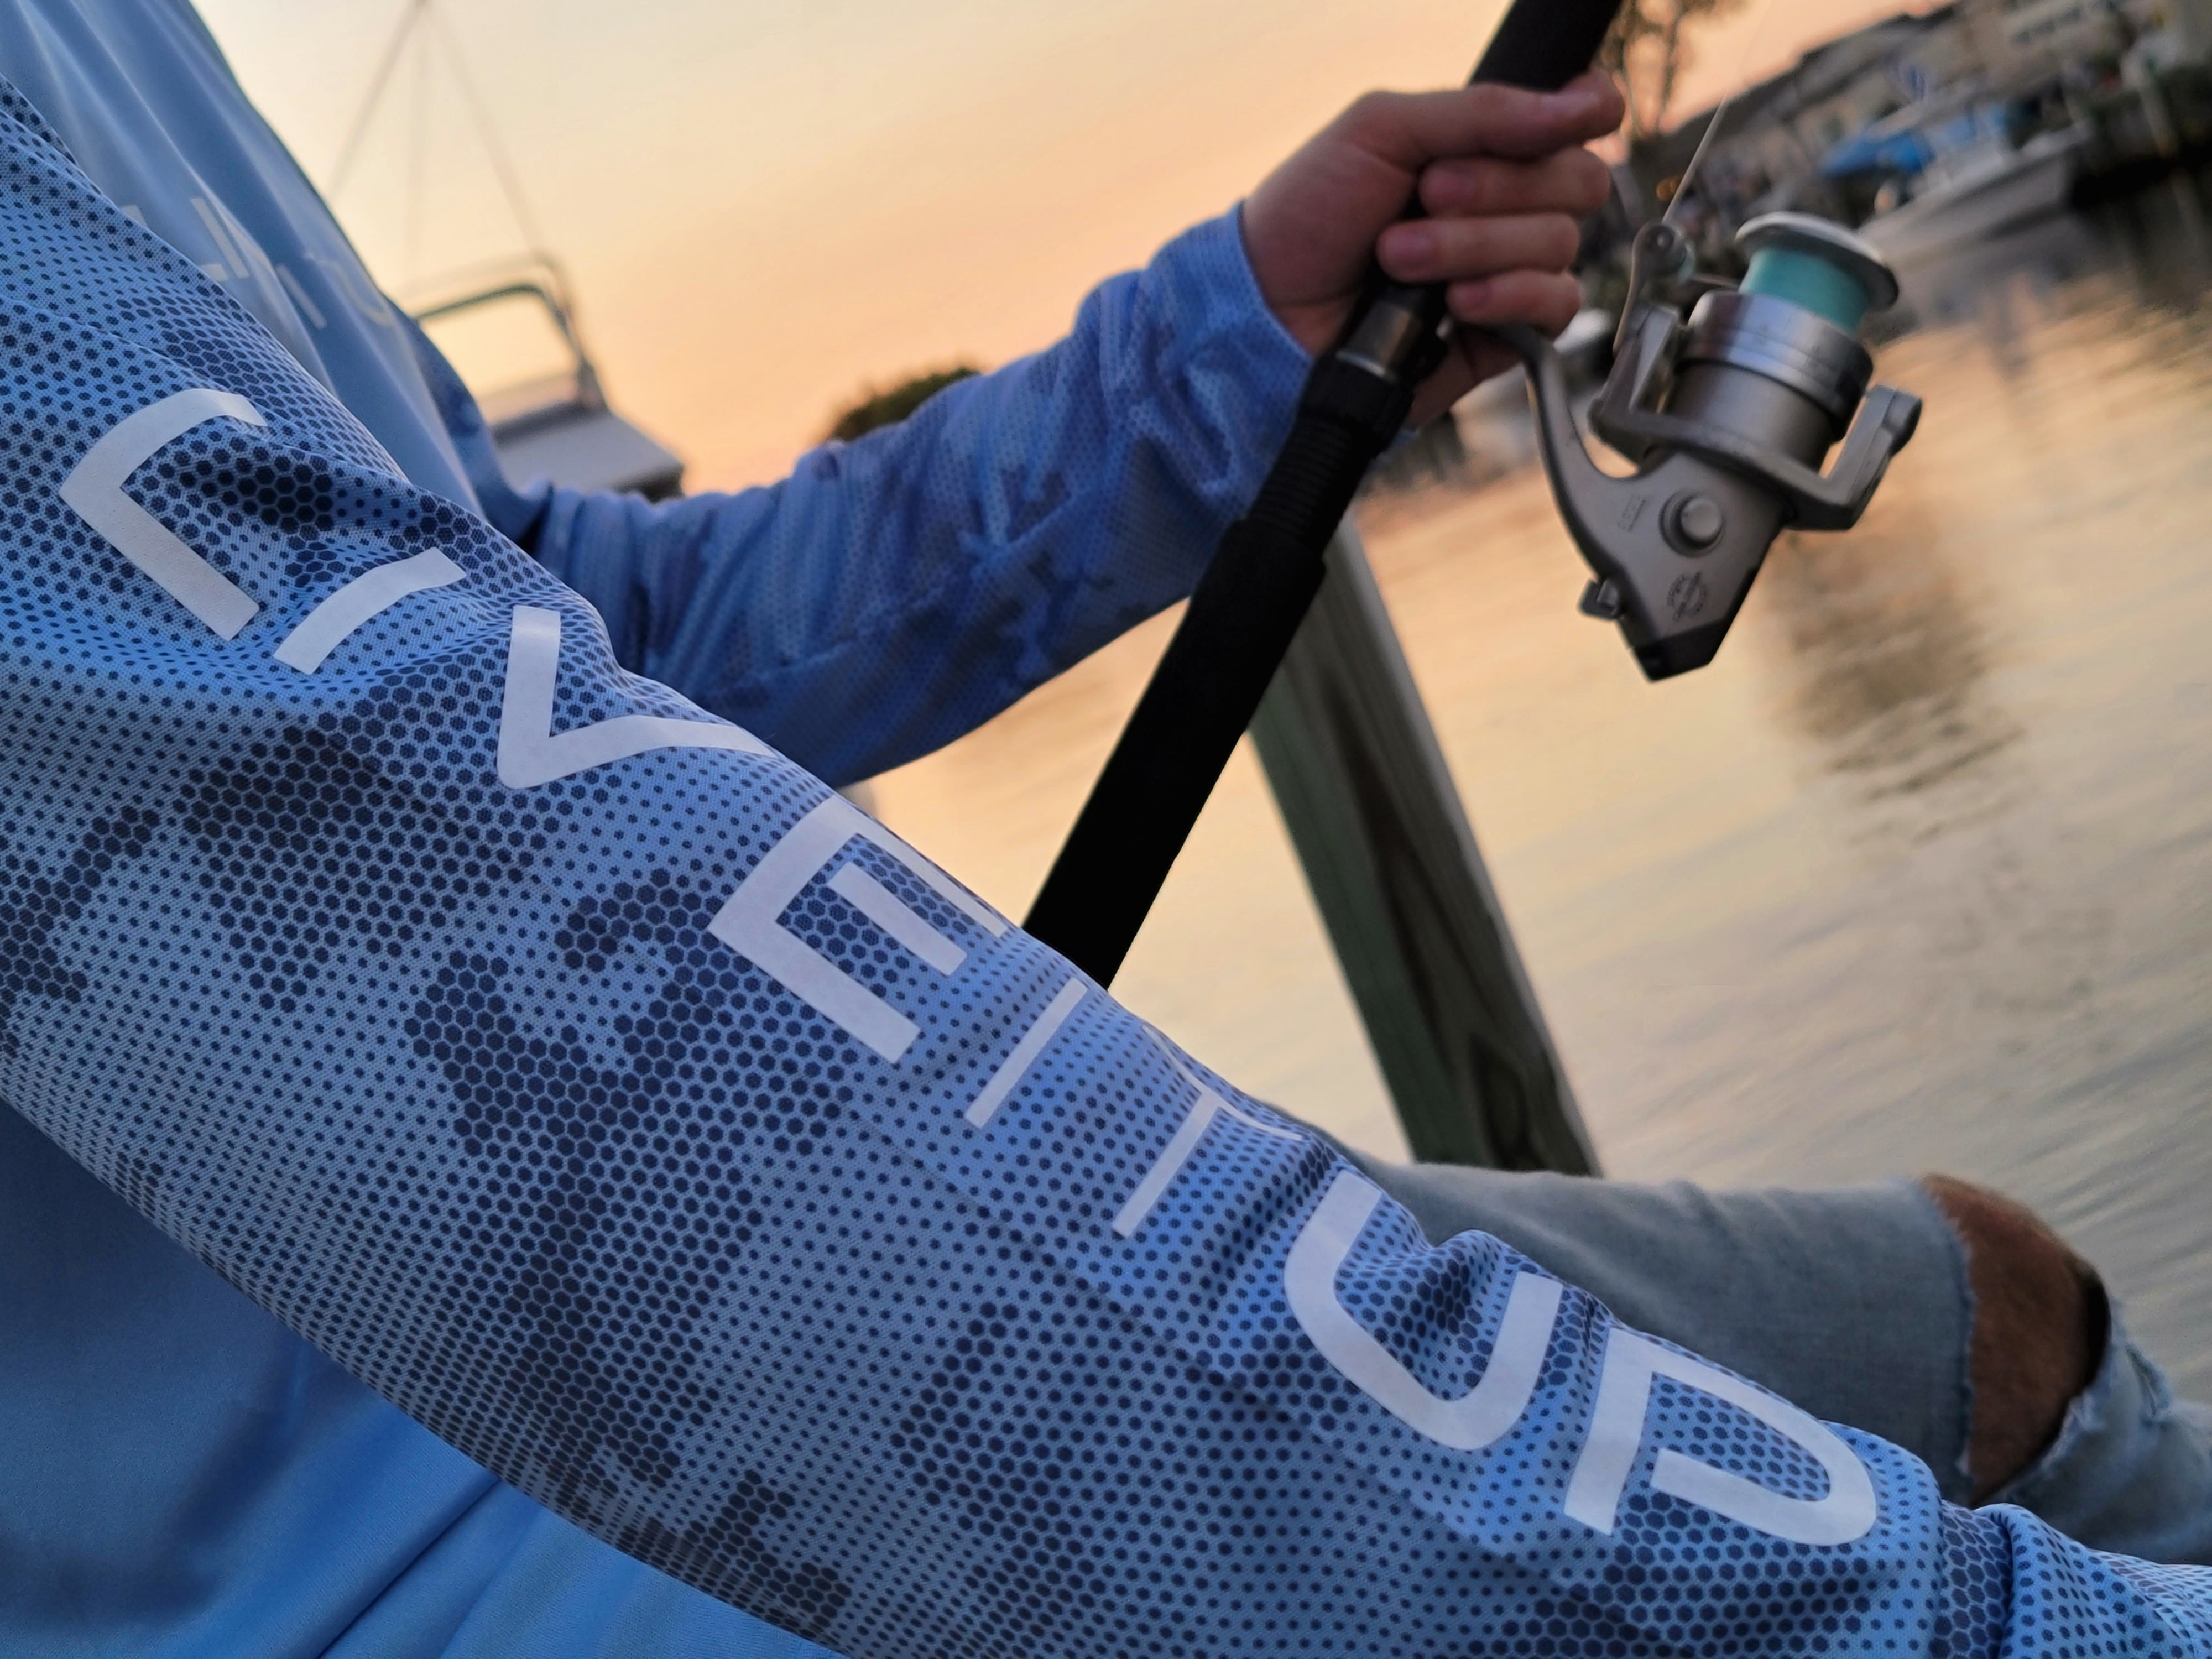 Live it Up Perfomance Fishing Shirt UV Protection Apparel with Fishing Pole near Barnegat Bay in New Jersey while Exploring and Finding New Things to Do Outdoors and in Nature High Performance Activewear for Fishing